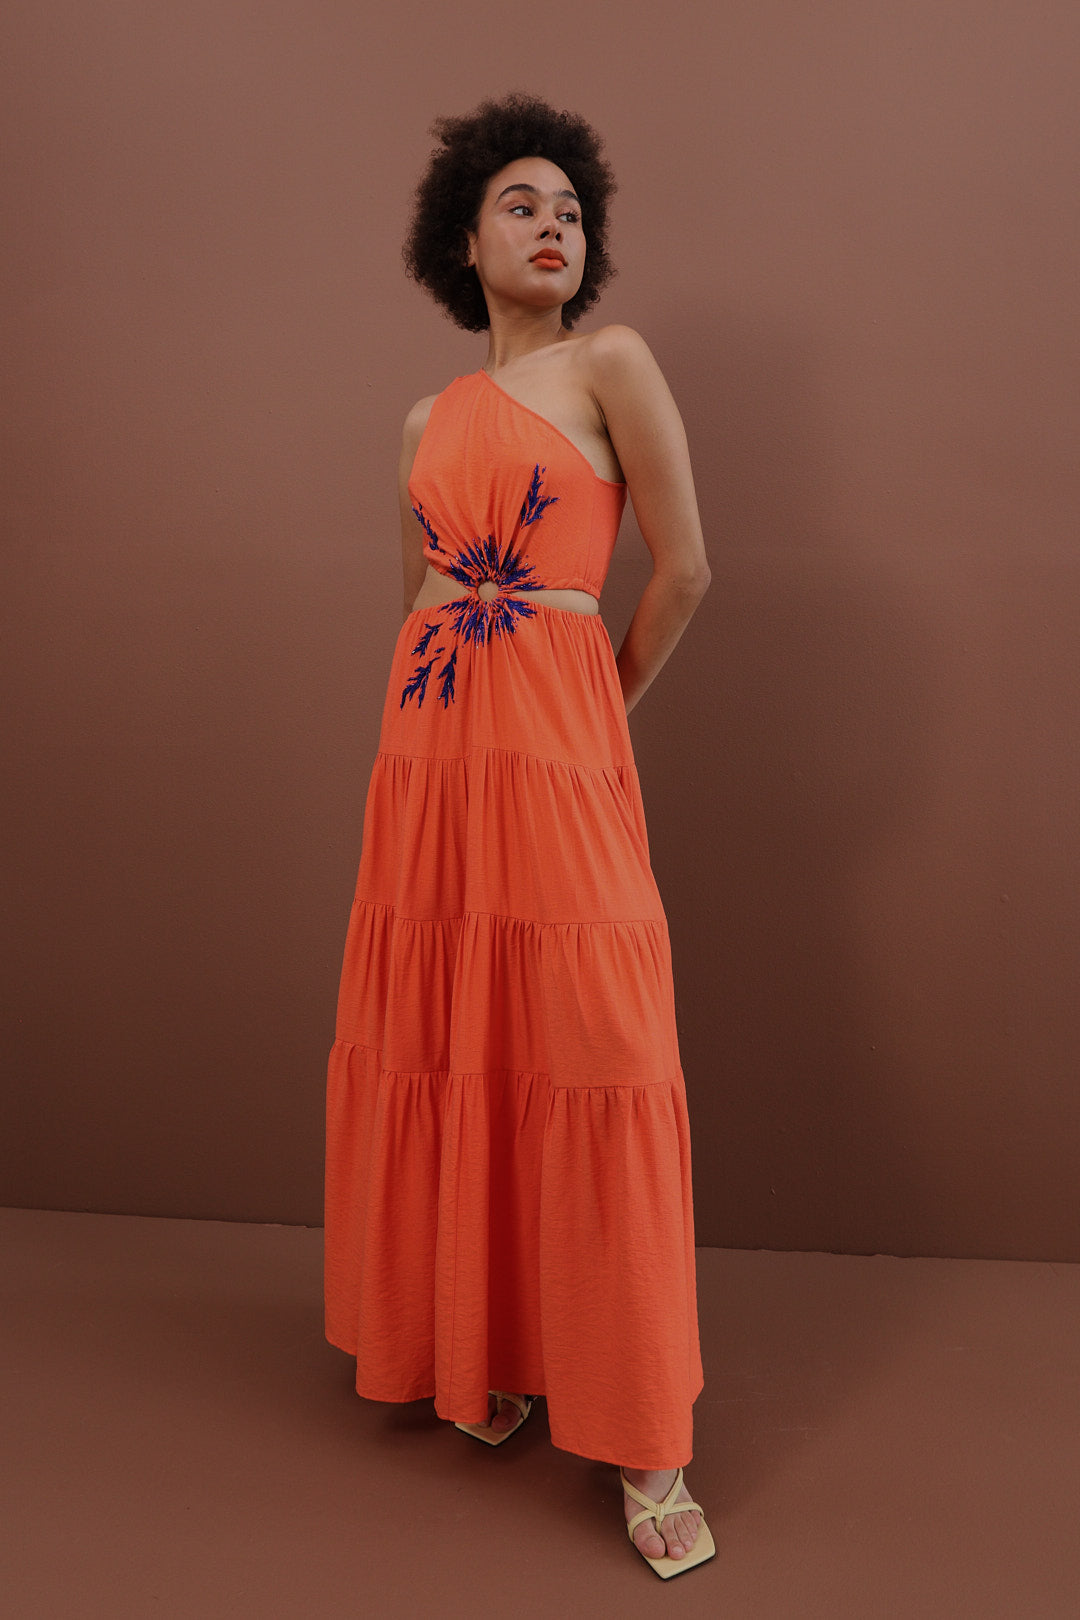 Orange dress with hand-made embroidery